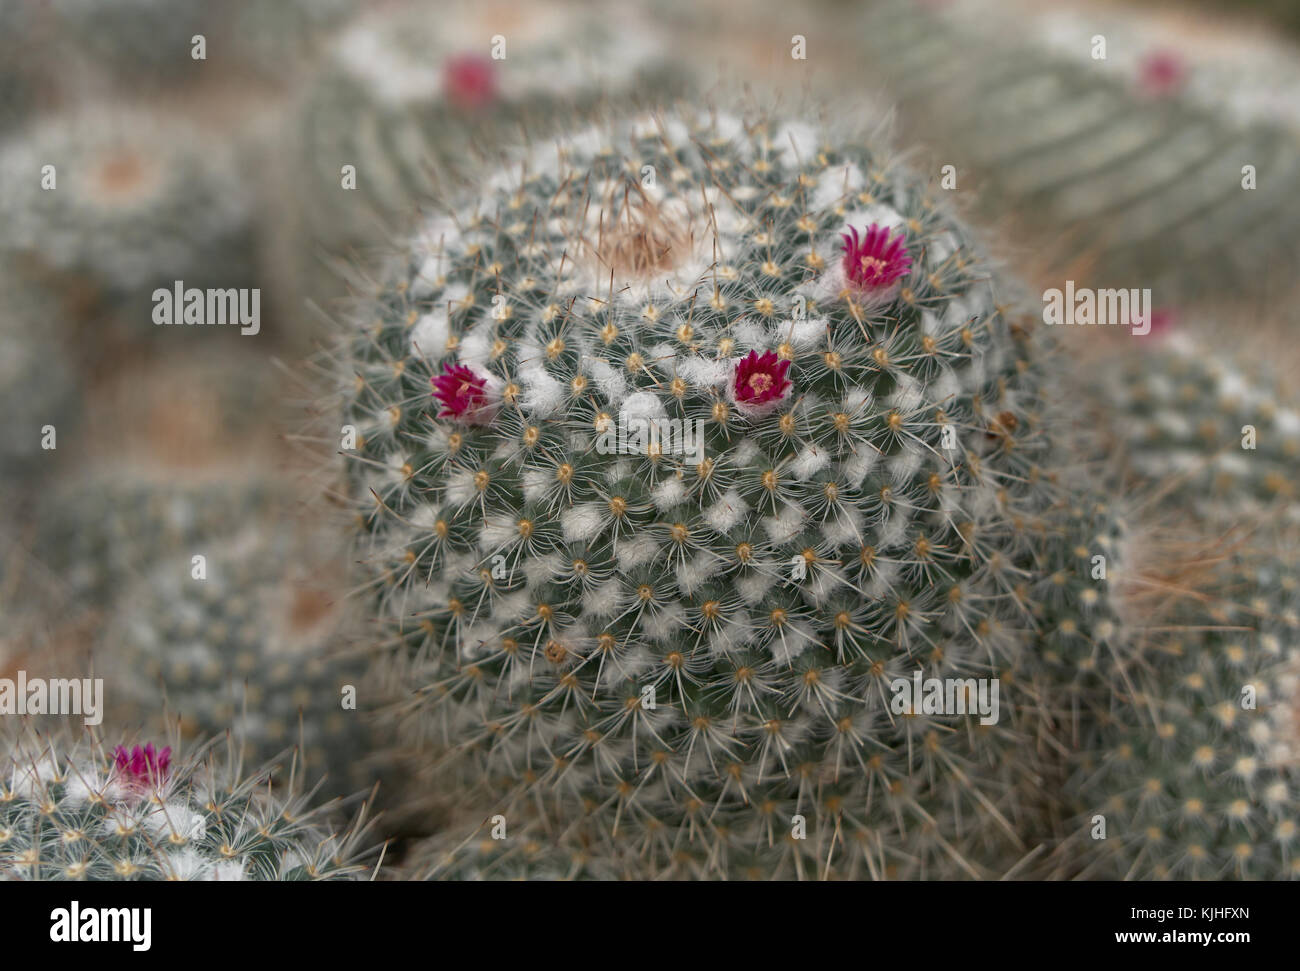 focus on foreground  of small spherical cactus plant with pink flowers and garden in background Stock Photo